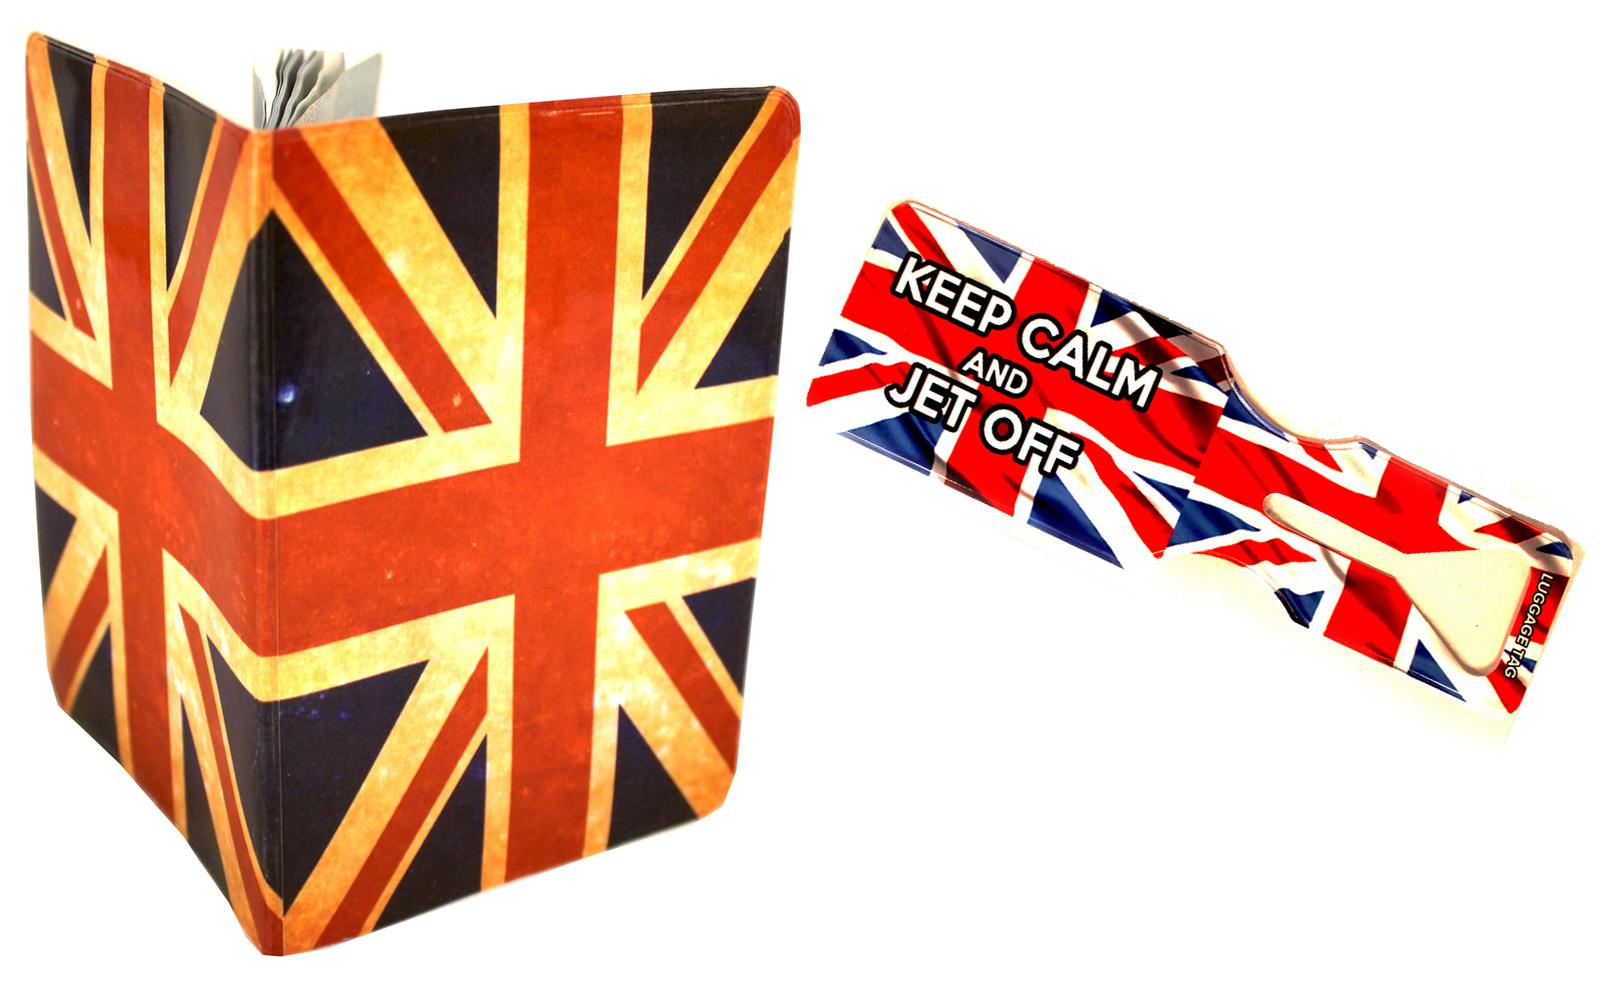 Union Jack Vintage and Keep Calm Union Jack Passport Cover and Luggage Tag Set annotated